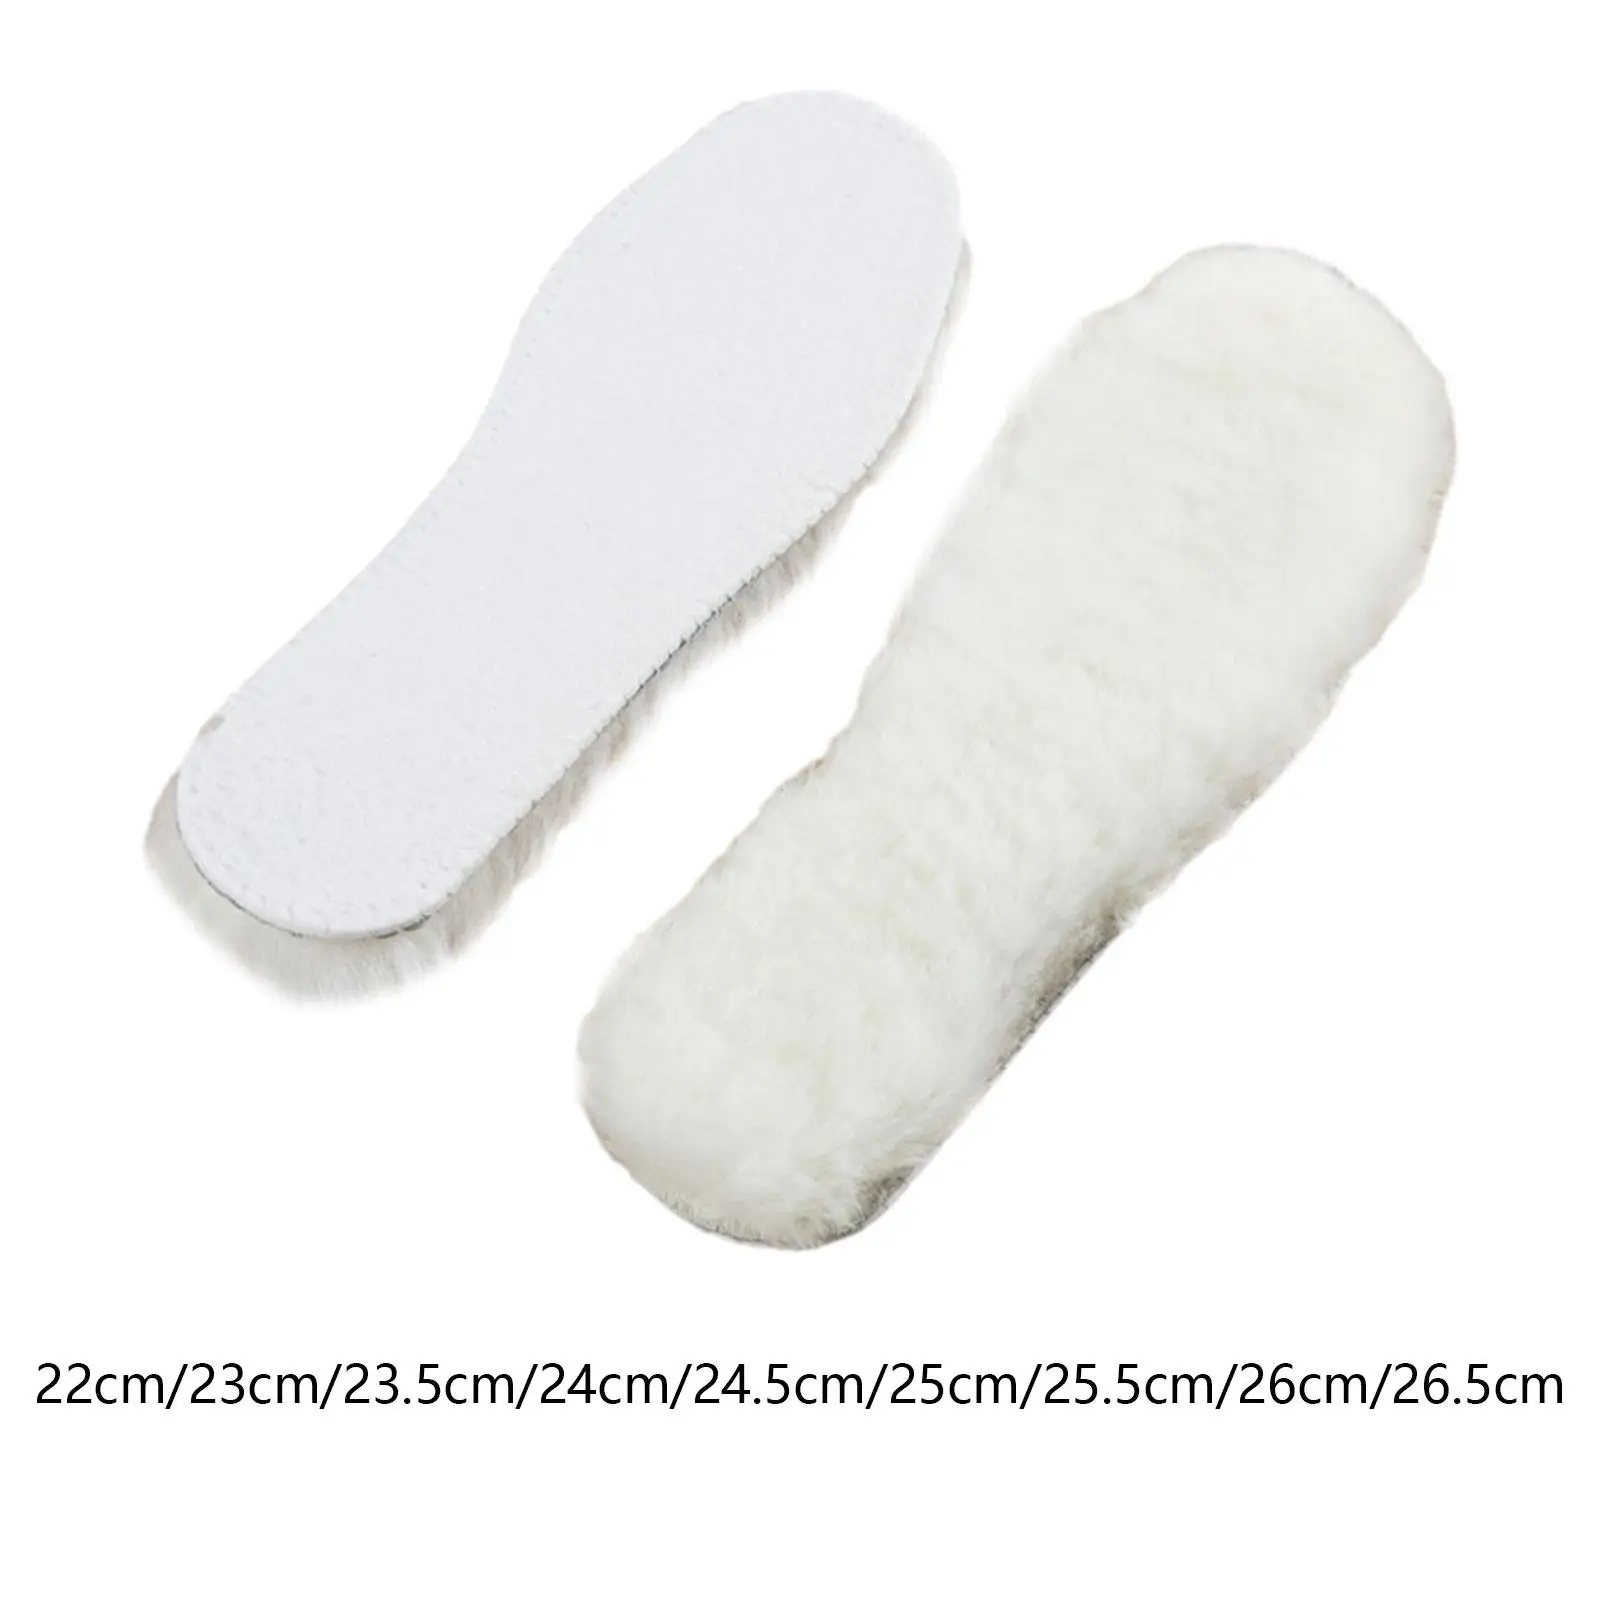 Wool Insoles Thick Inner Soles Thermal Comfortable for Women Men Premium Fleece Insoles for Boots Slippers Shoes Outdoor Sports